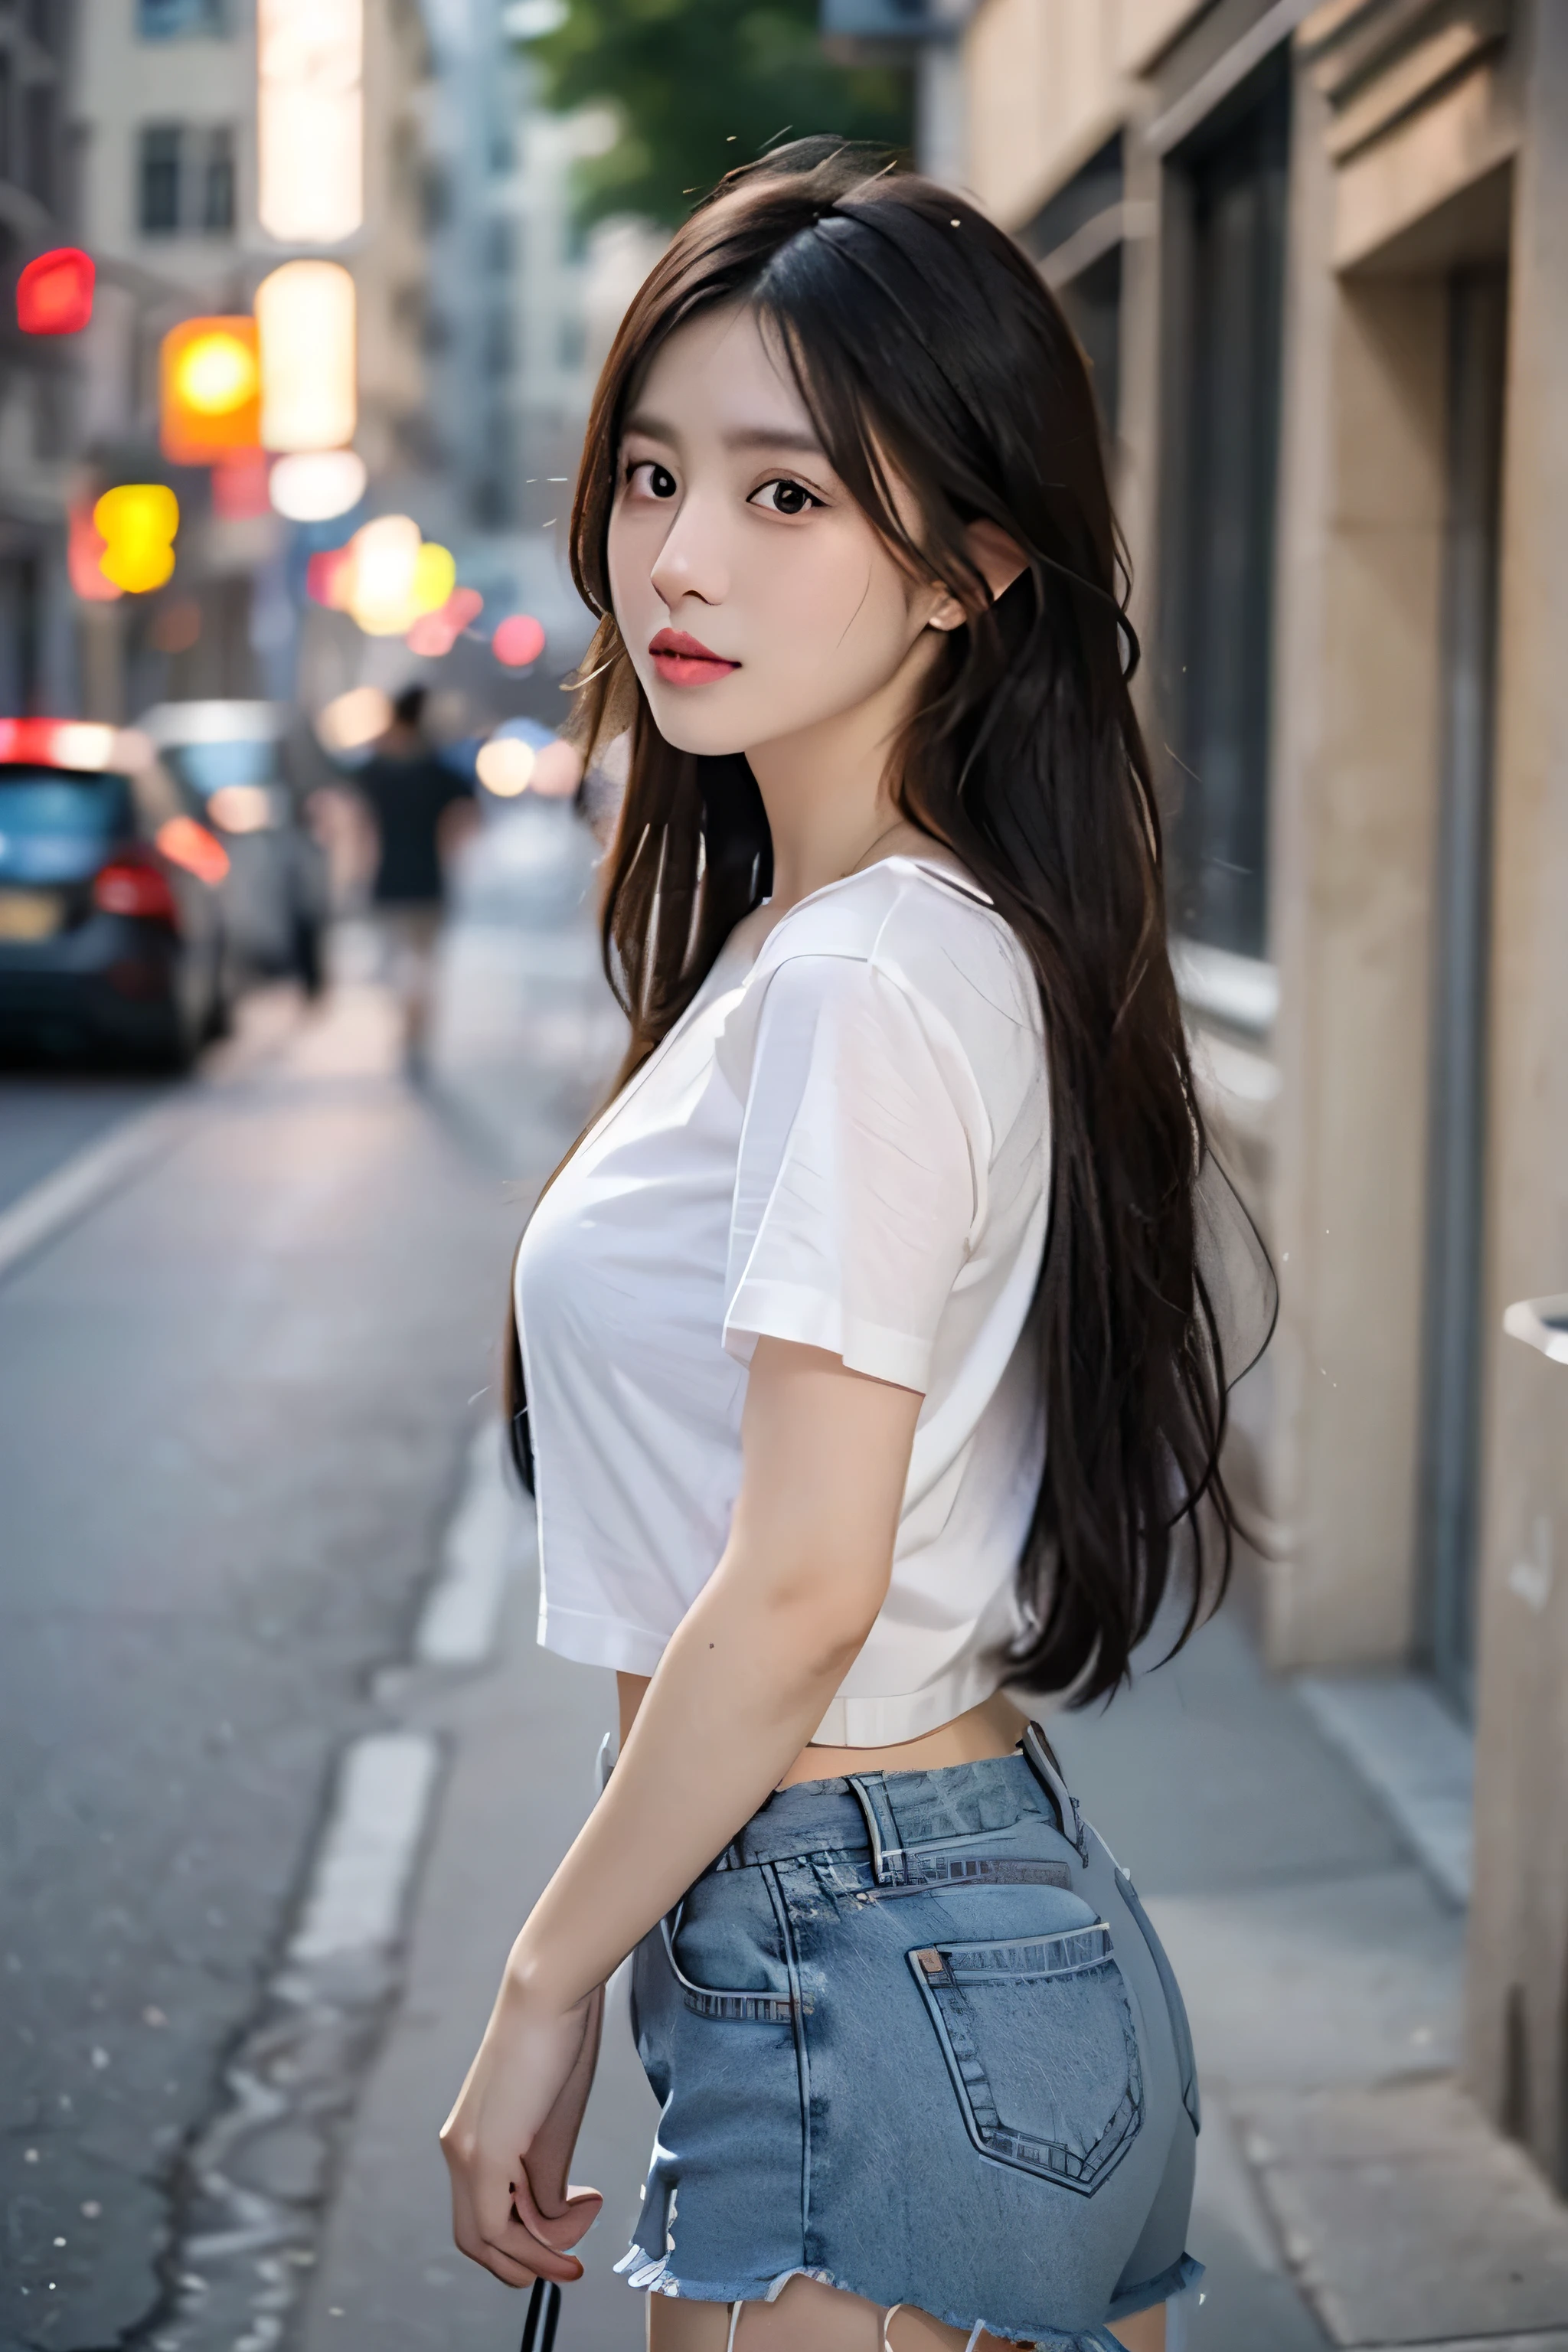 best quality, masterpiece, ultra high resolution, (actual: 1.4), original photo, (Evening Street), 1 girl, black eyes, looking at the audience, long hair, Light makeup, lips, Small ears, White T-shirt, Denim shorts, earrings, ride a ferrari, big breasts, Slim